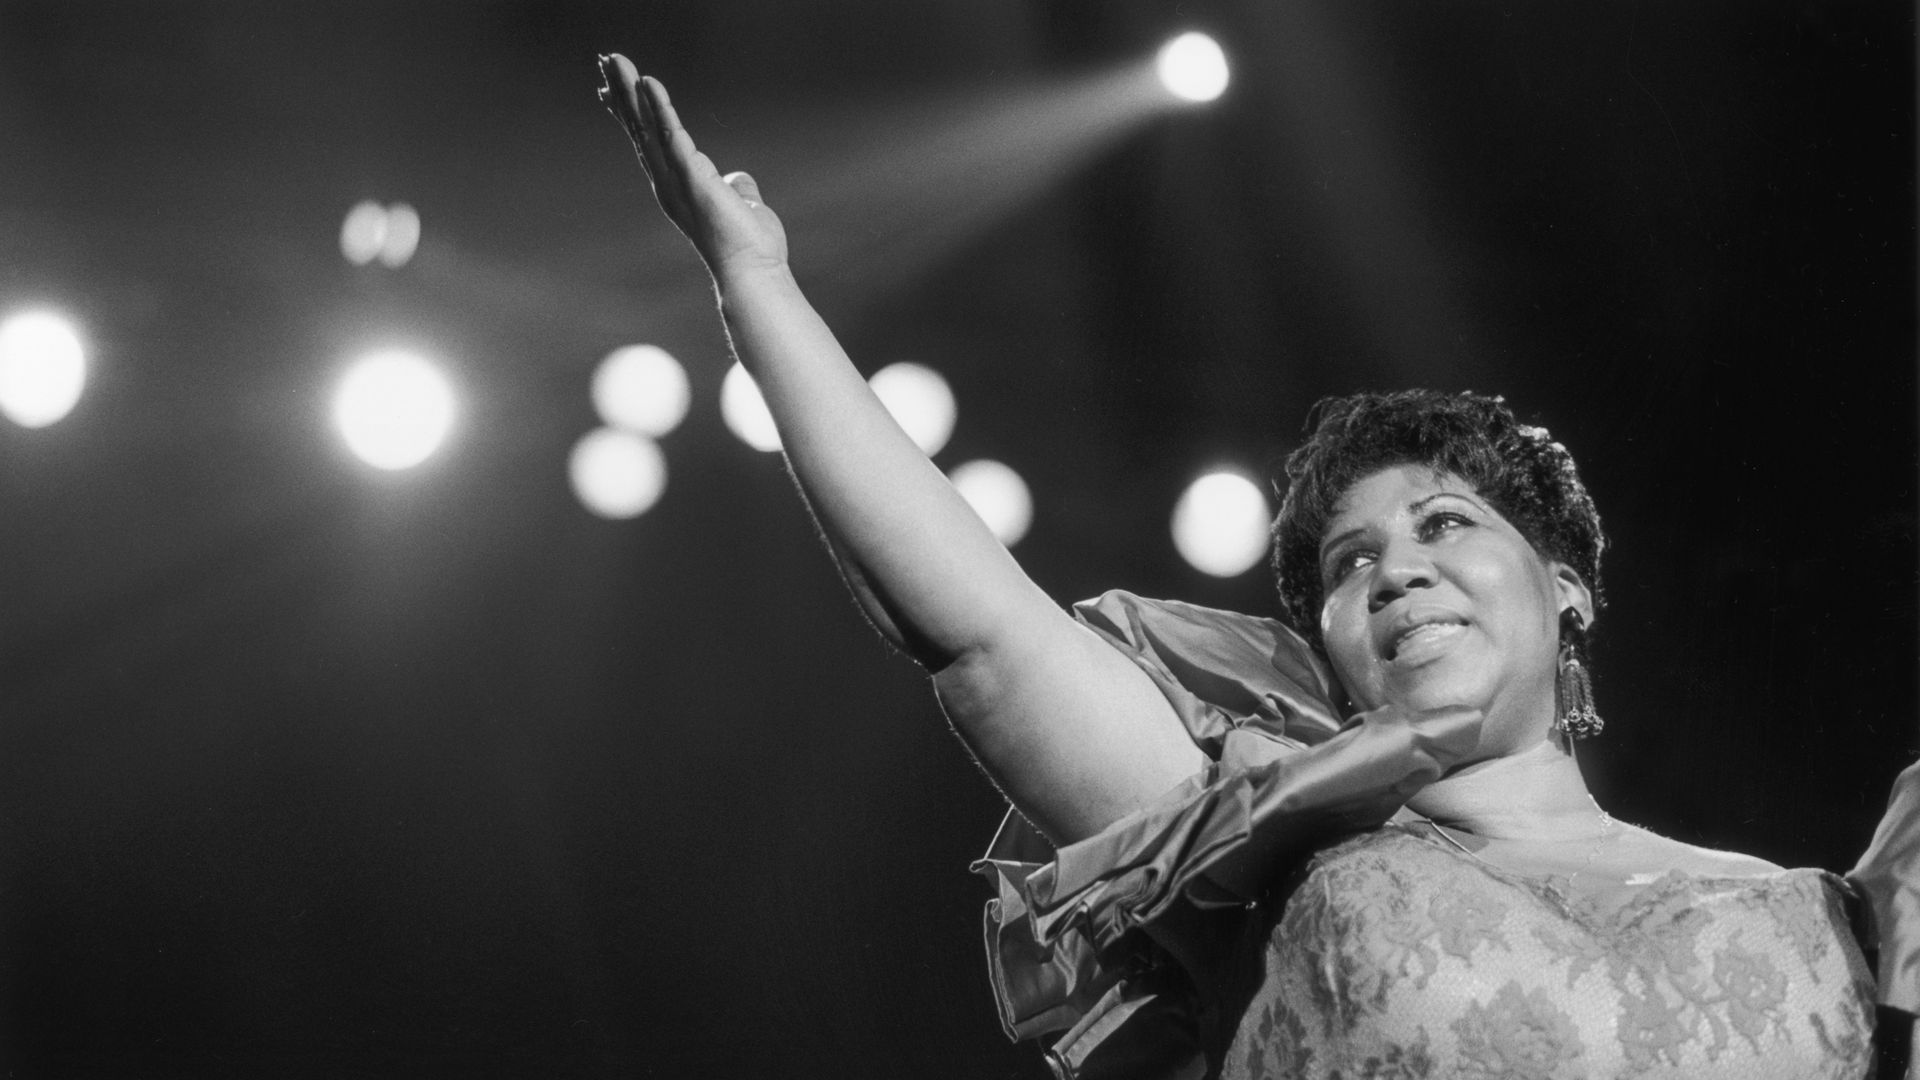 Soul singer Aretha Franklin performing at the New Orleans Jazz Festival in 1994.